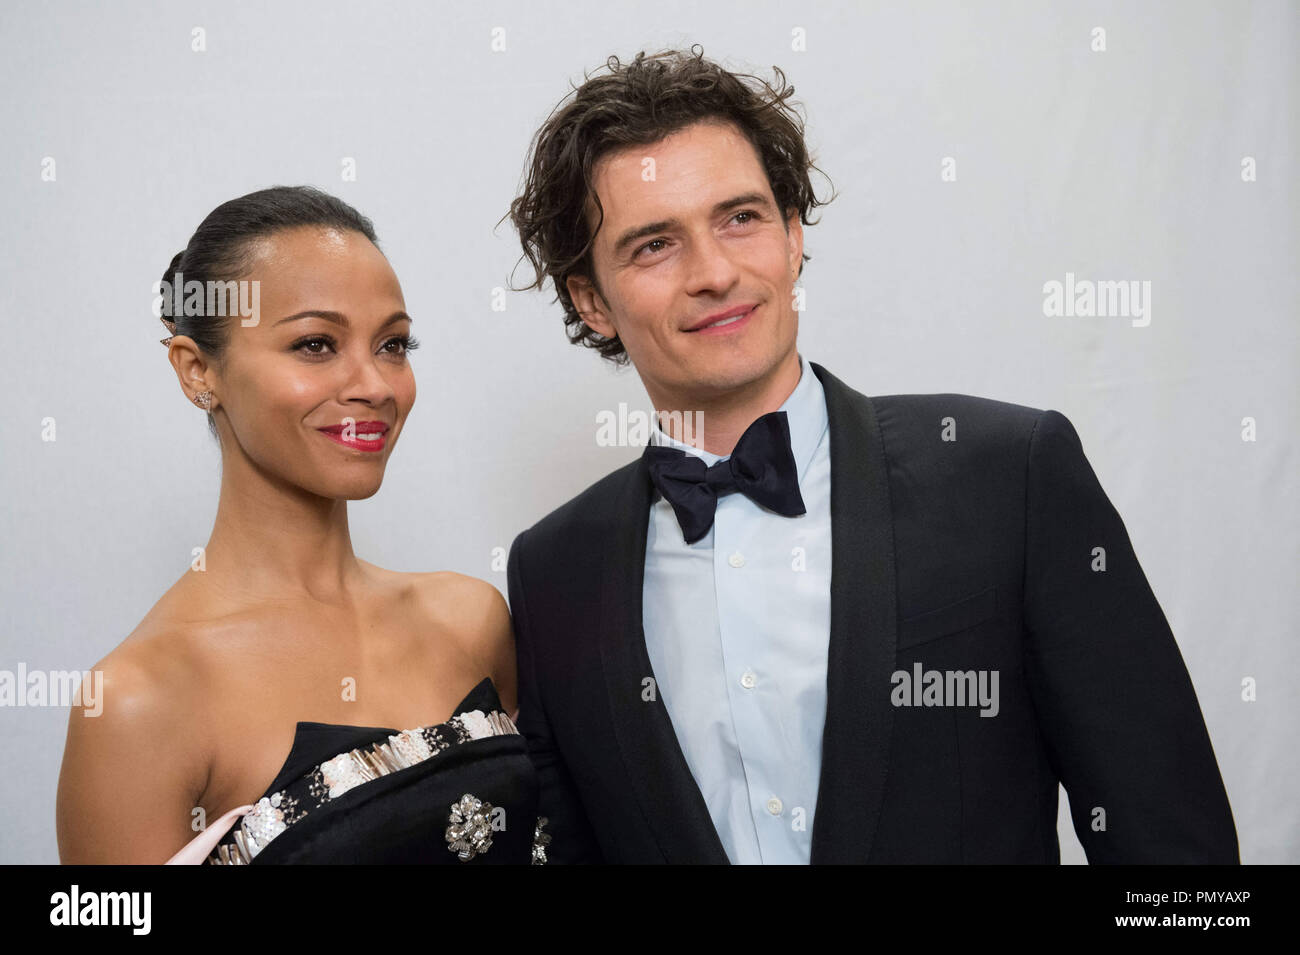 Zoe Saldana and Orlando Bloom at the 71st Annual Golden Globe Awards at the Beverly Hilton in Beverly Hills, CA on Sunday, January 12, 2014.  File Reference # 32222 472JRC  For Editorial Use Only -  All Rights Reserved Stock Photo